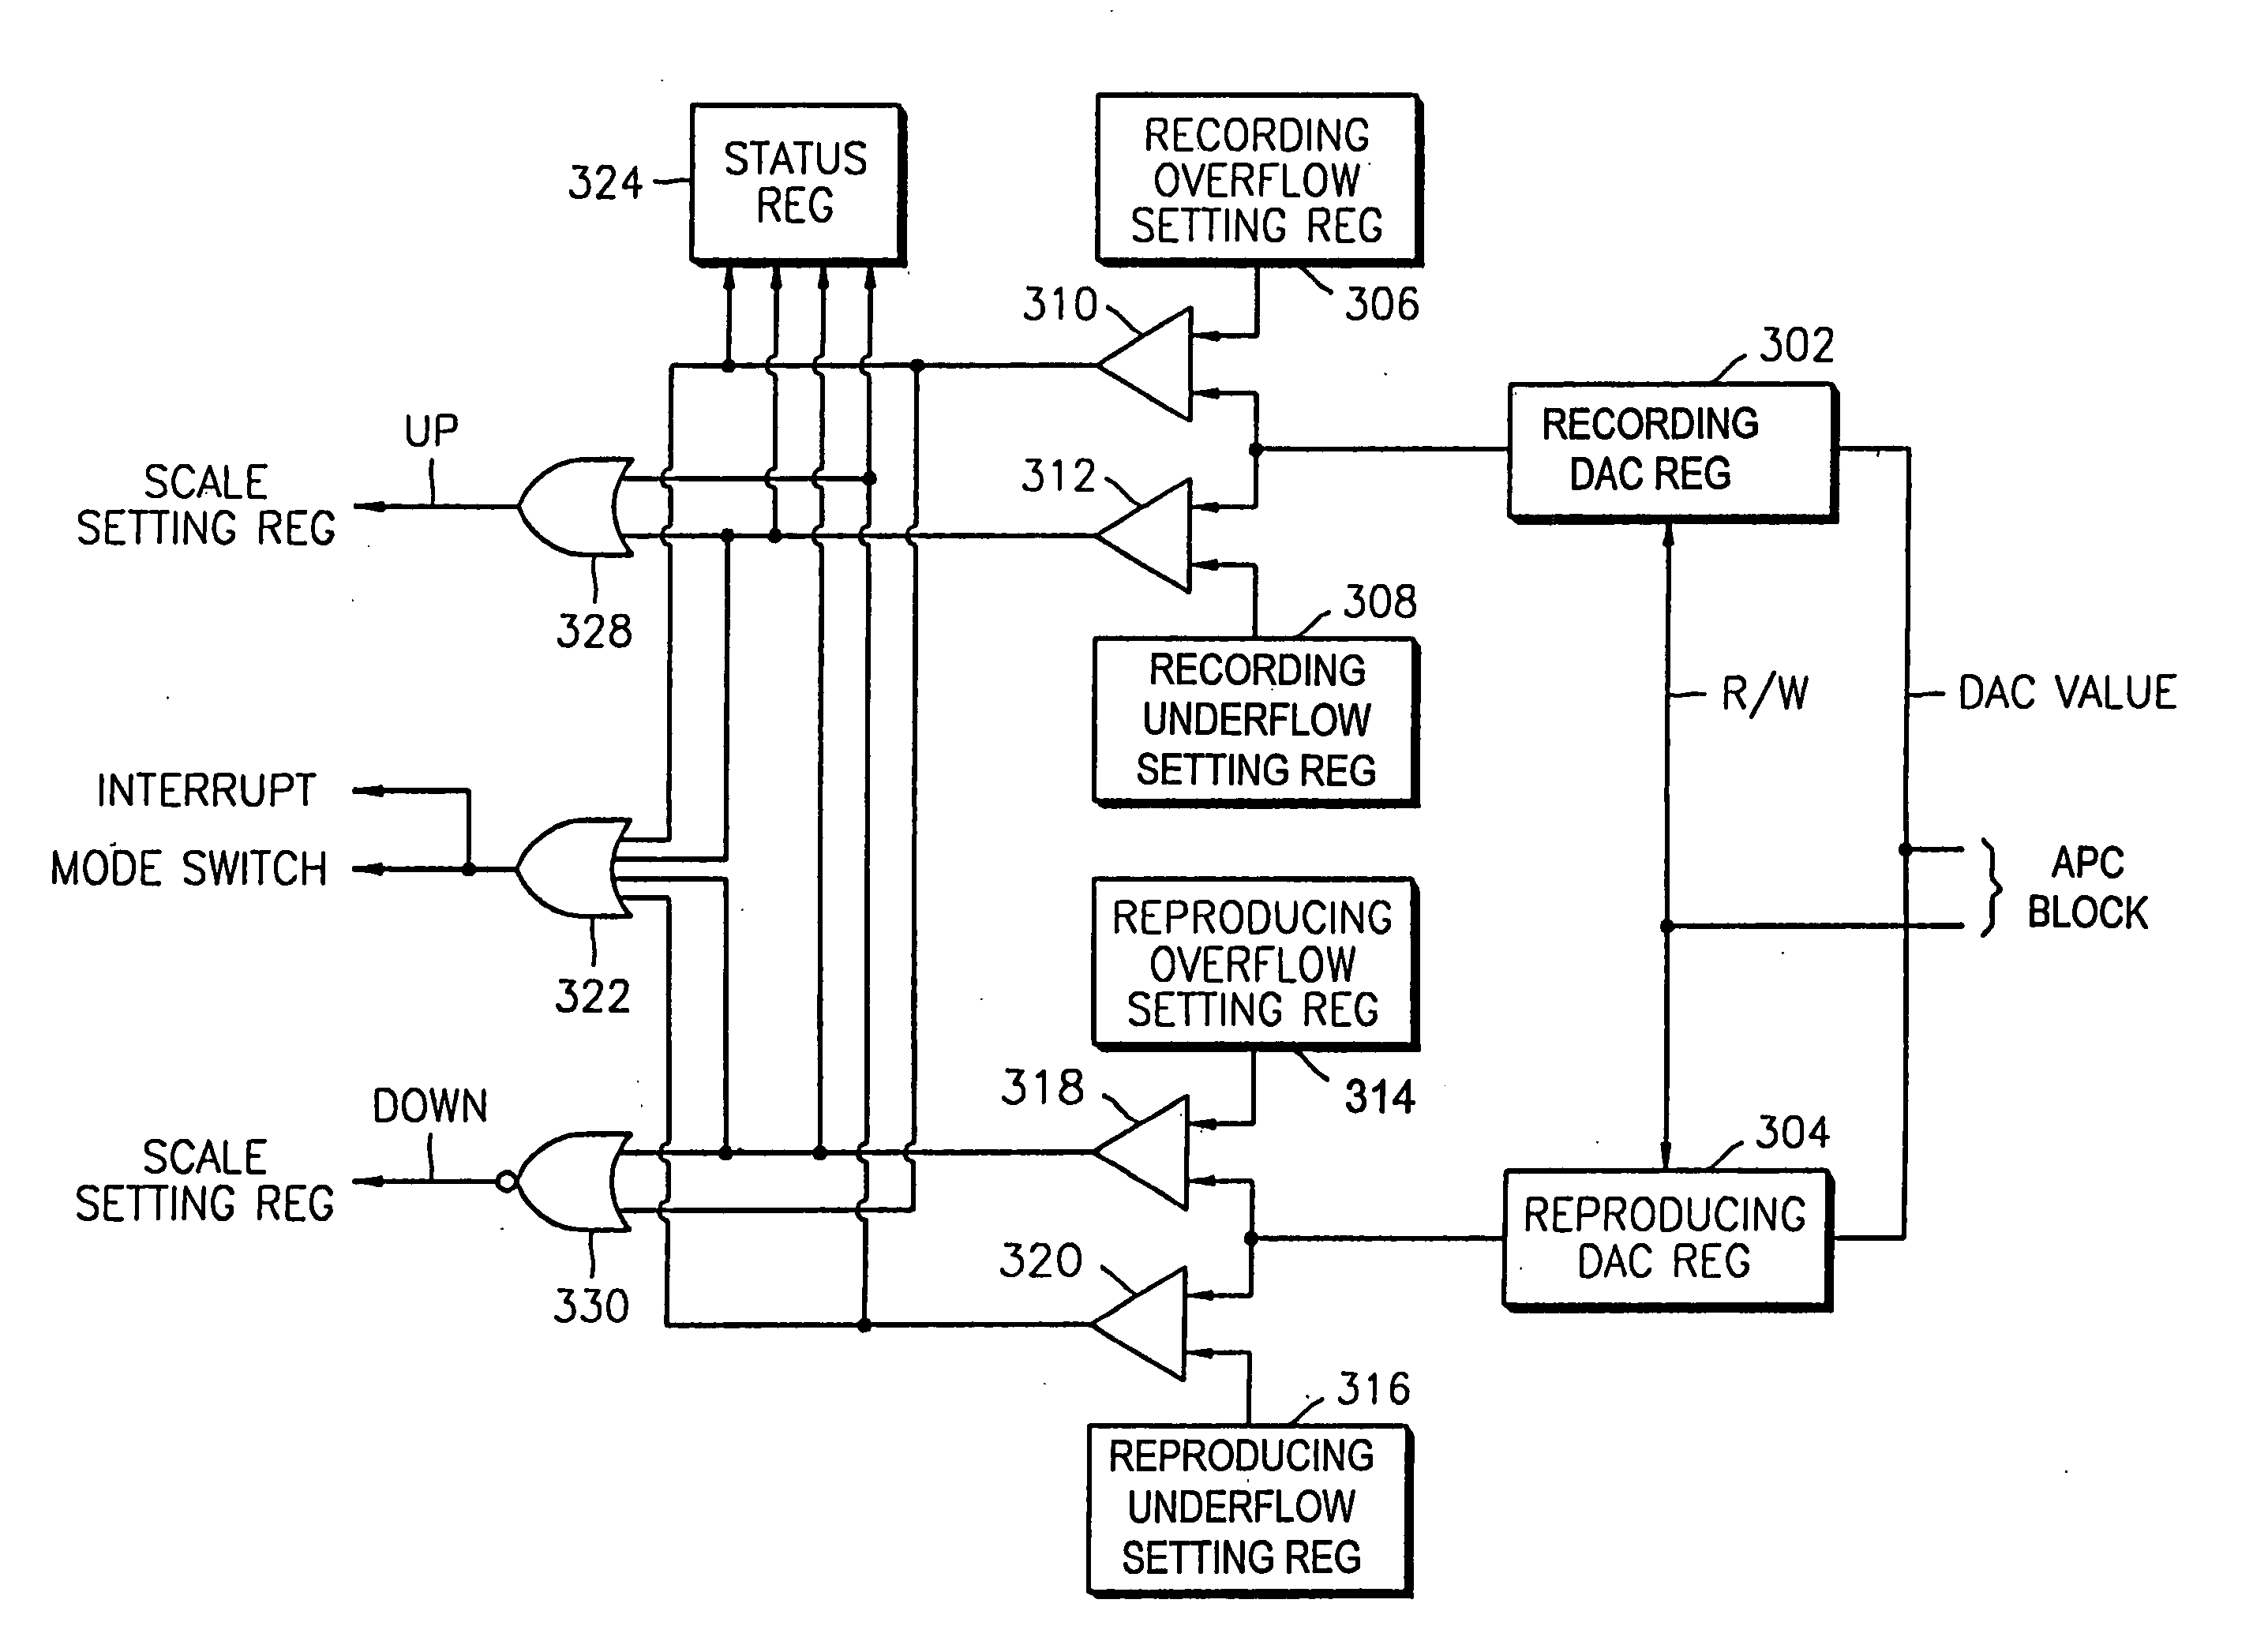 Apparatus for detecting abnormal states of laser diode power in an optical disc recording/reproducing device